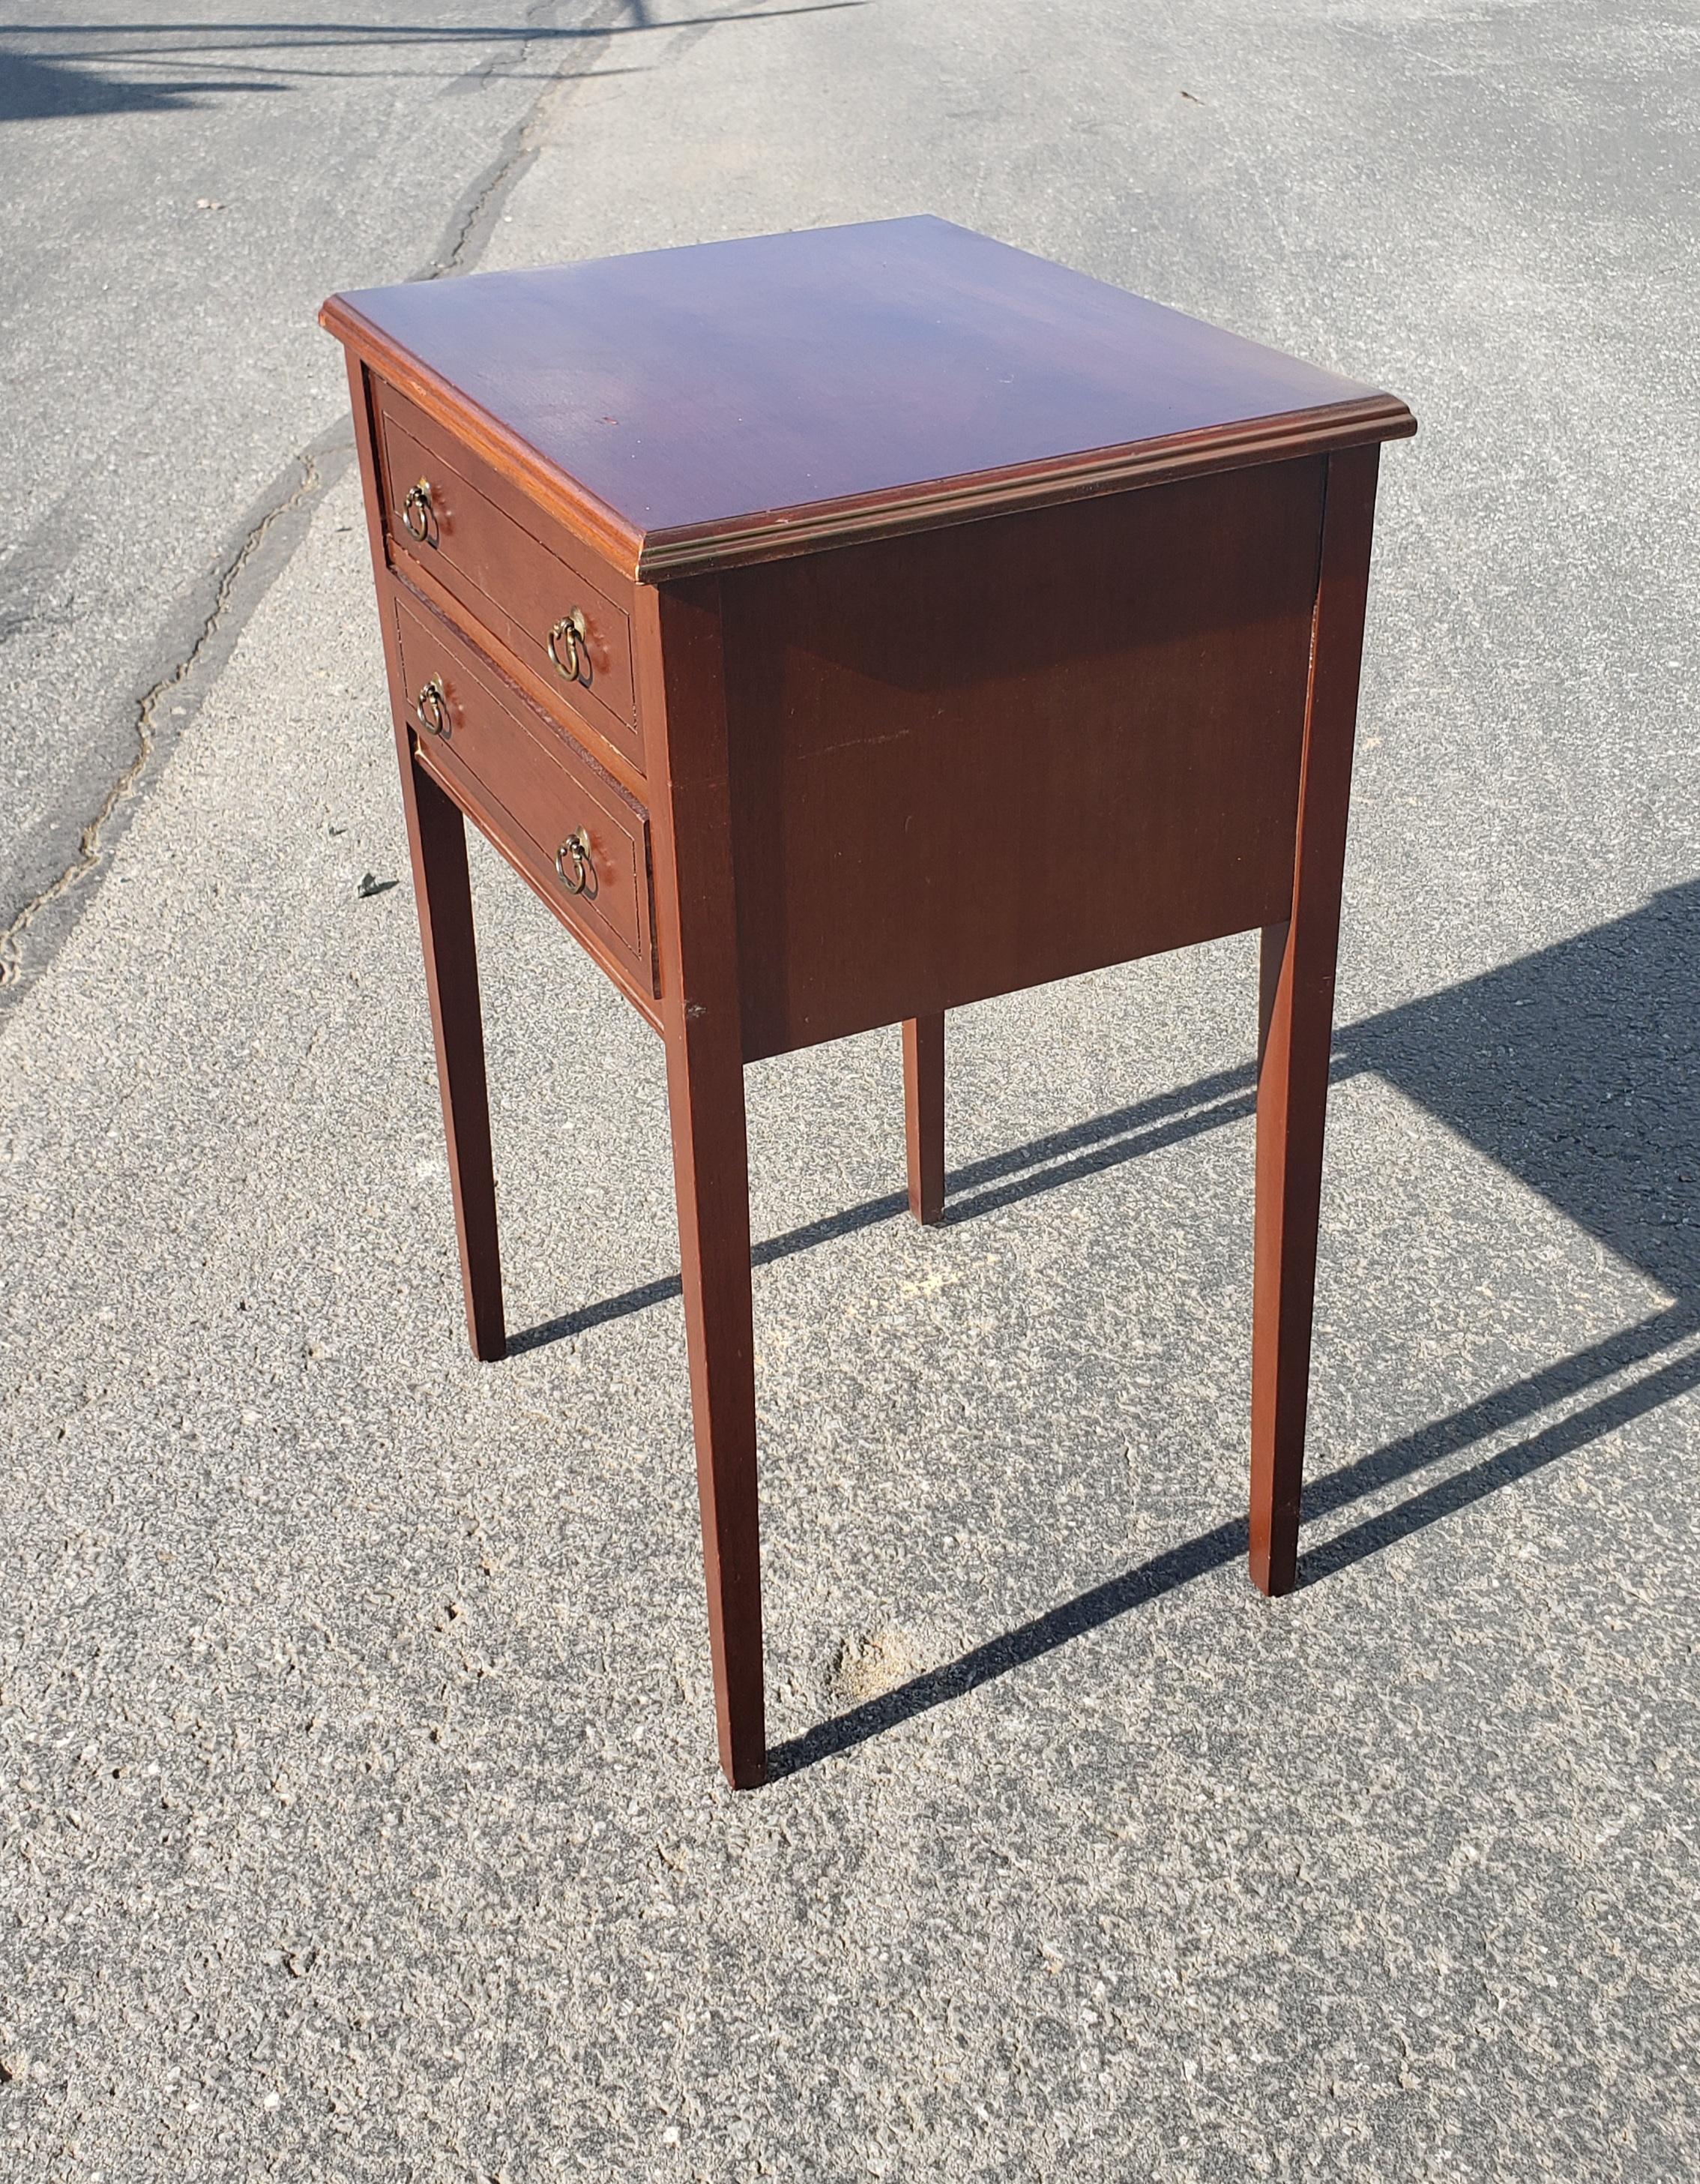 Woodwork 1940s Regency Two-Drawers Mahogany Side Tables by Mersman Furniture, a Pair For Sale